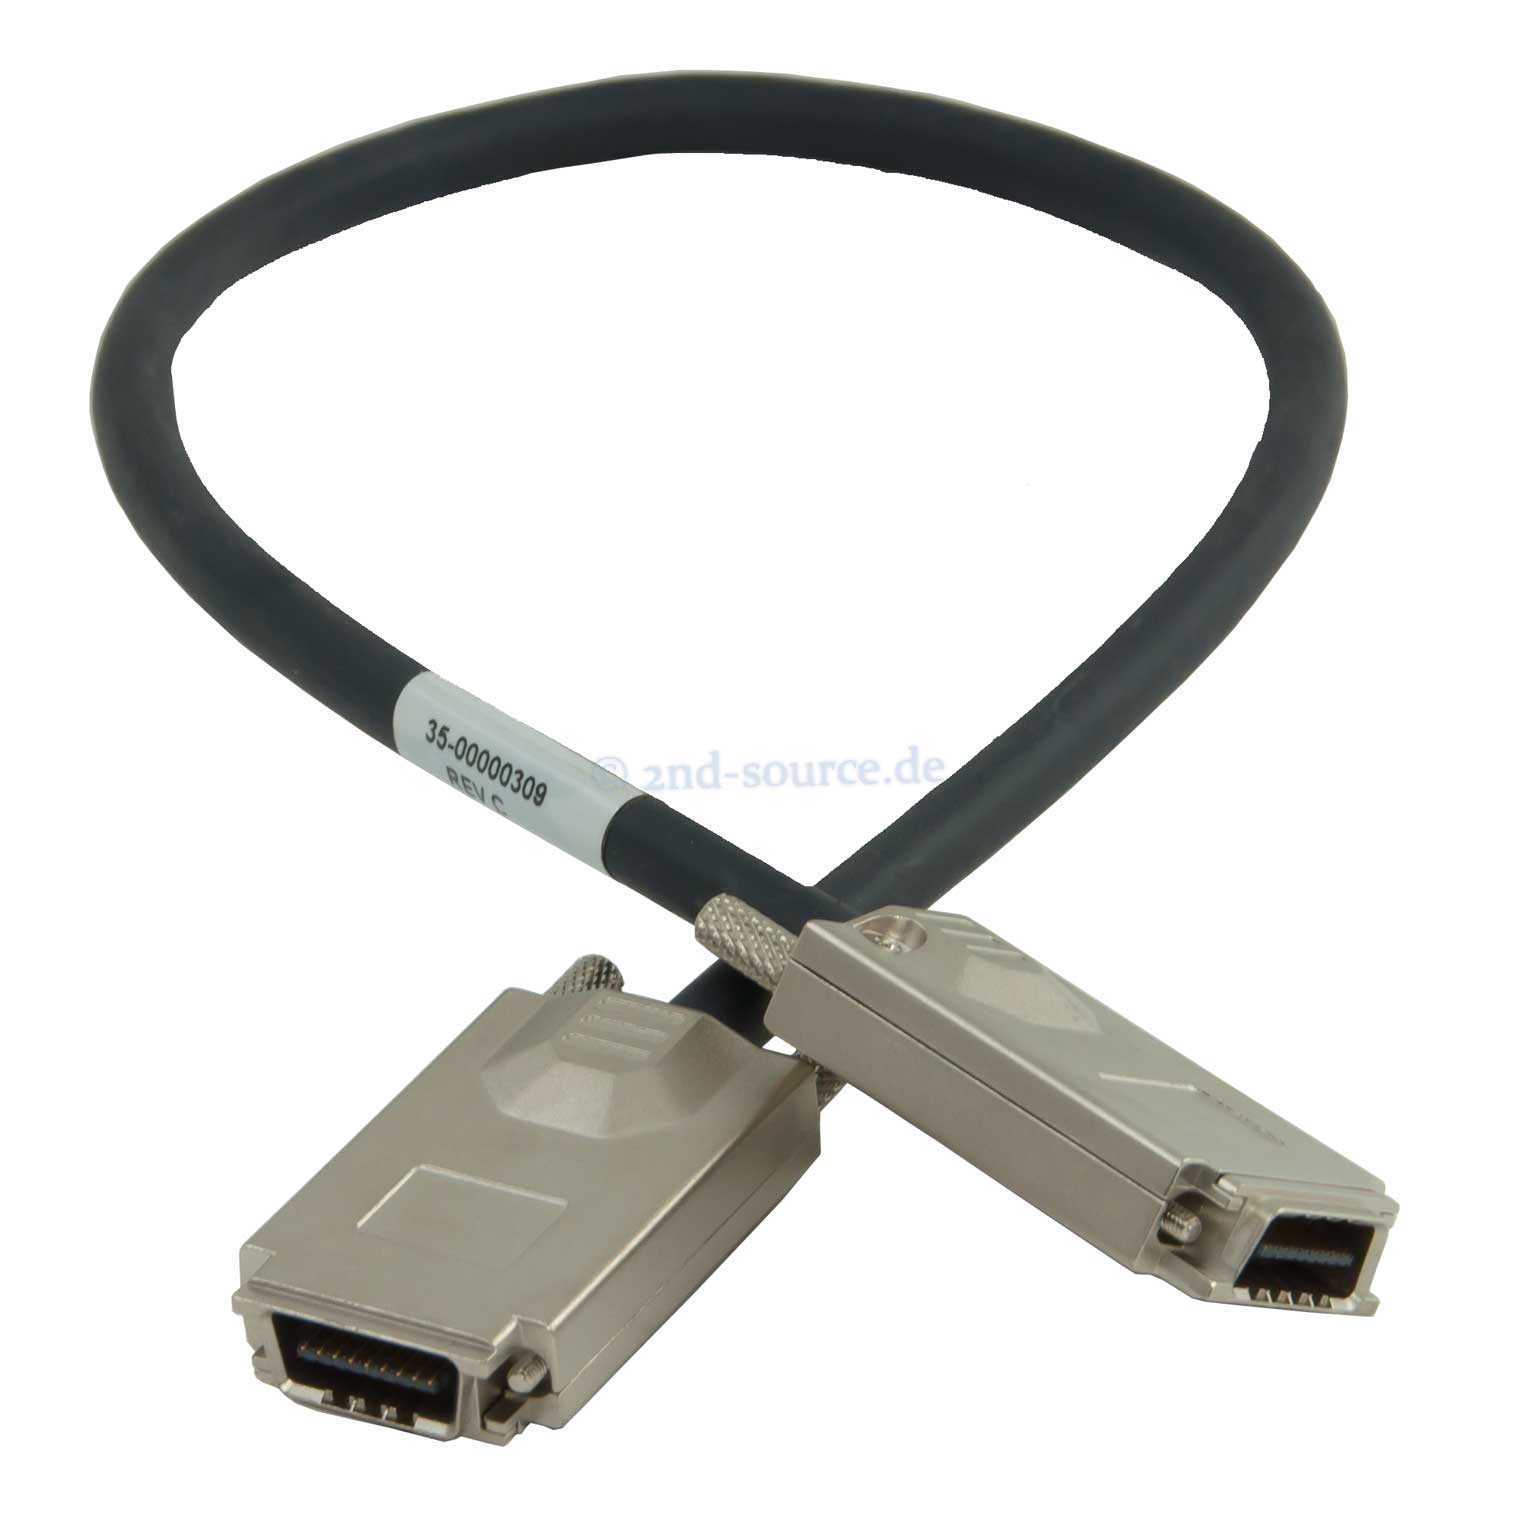 HPE 0.60m SFF-8470 to SFF-8470 External SAS Cable 35-00000309